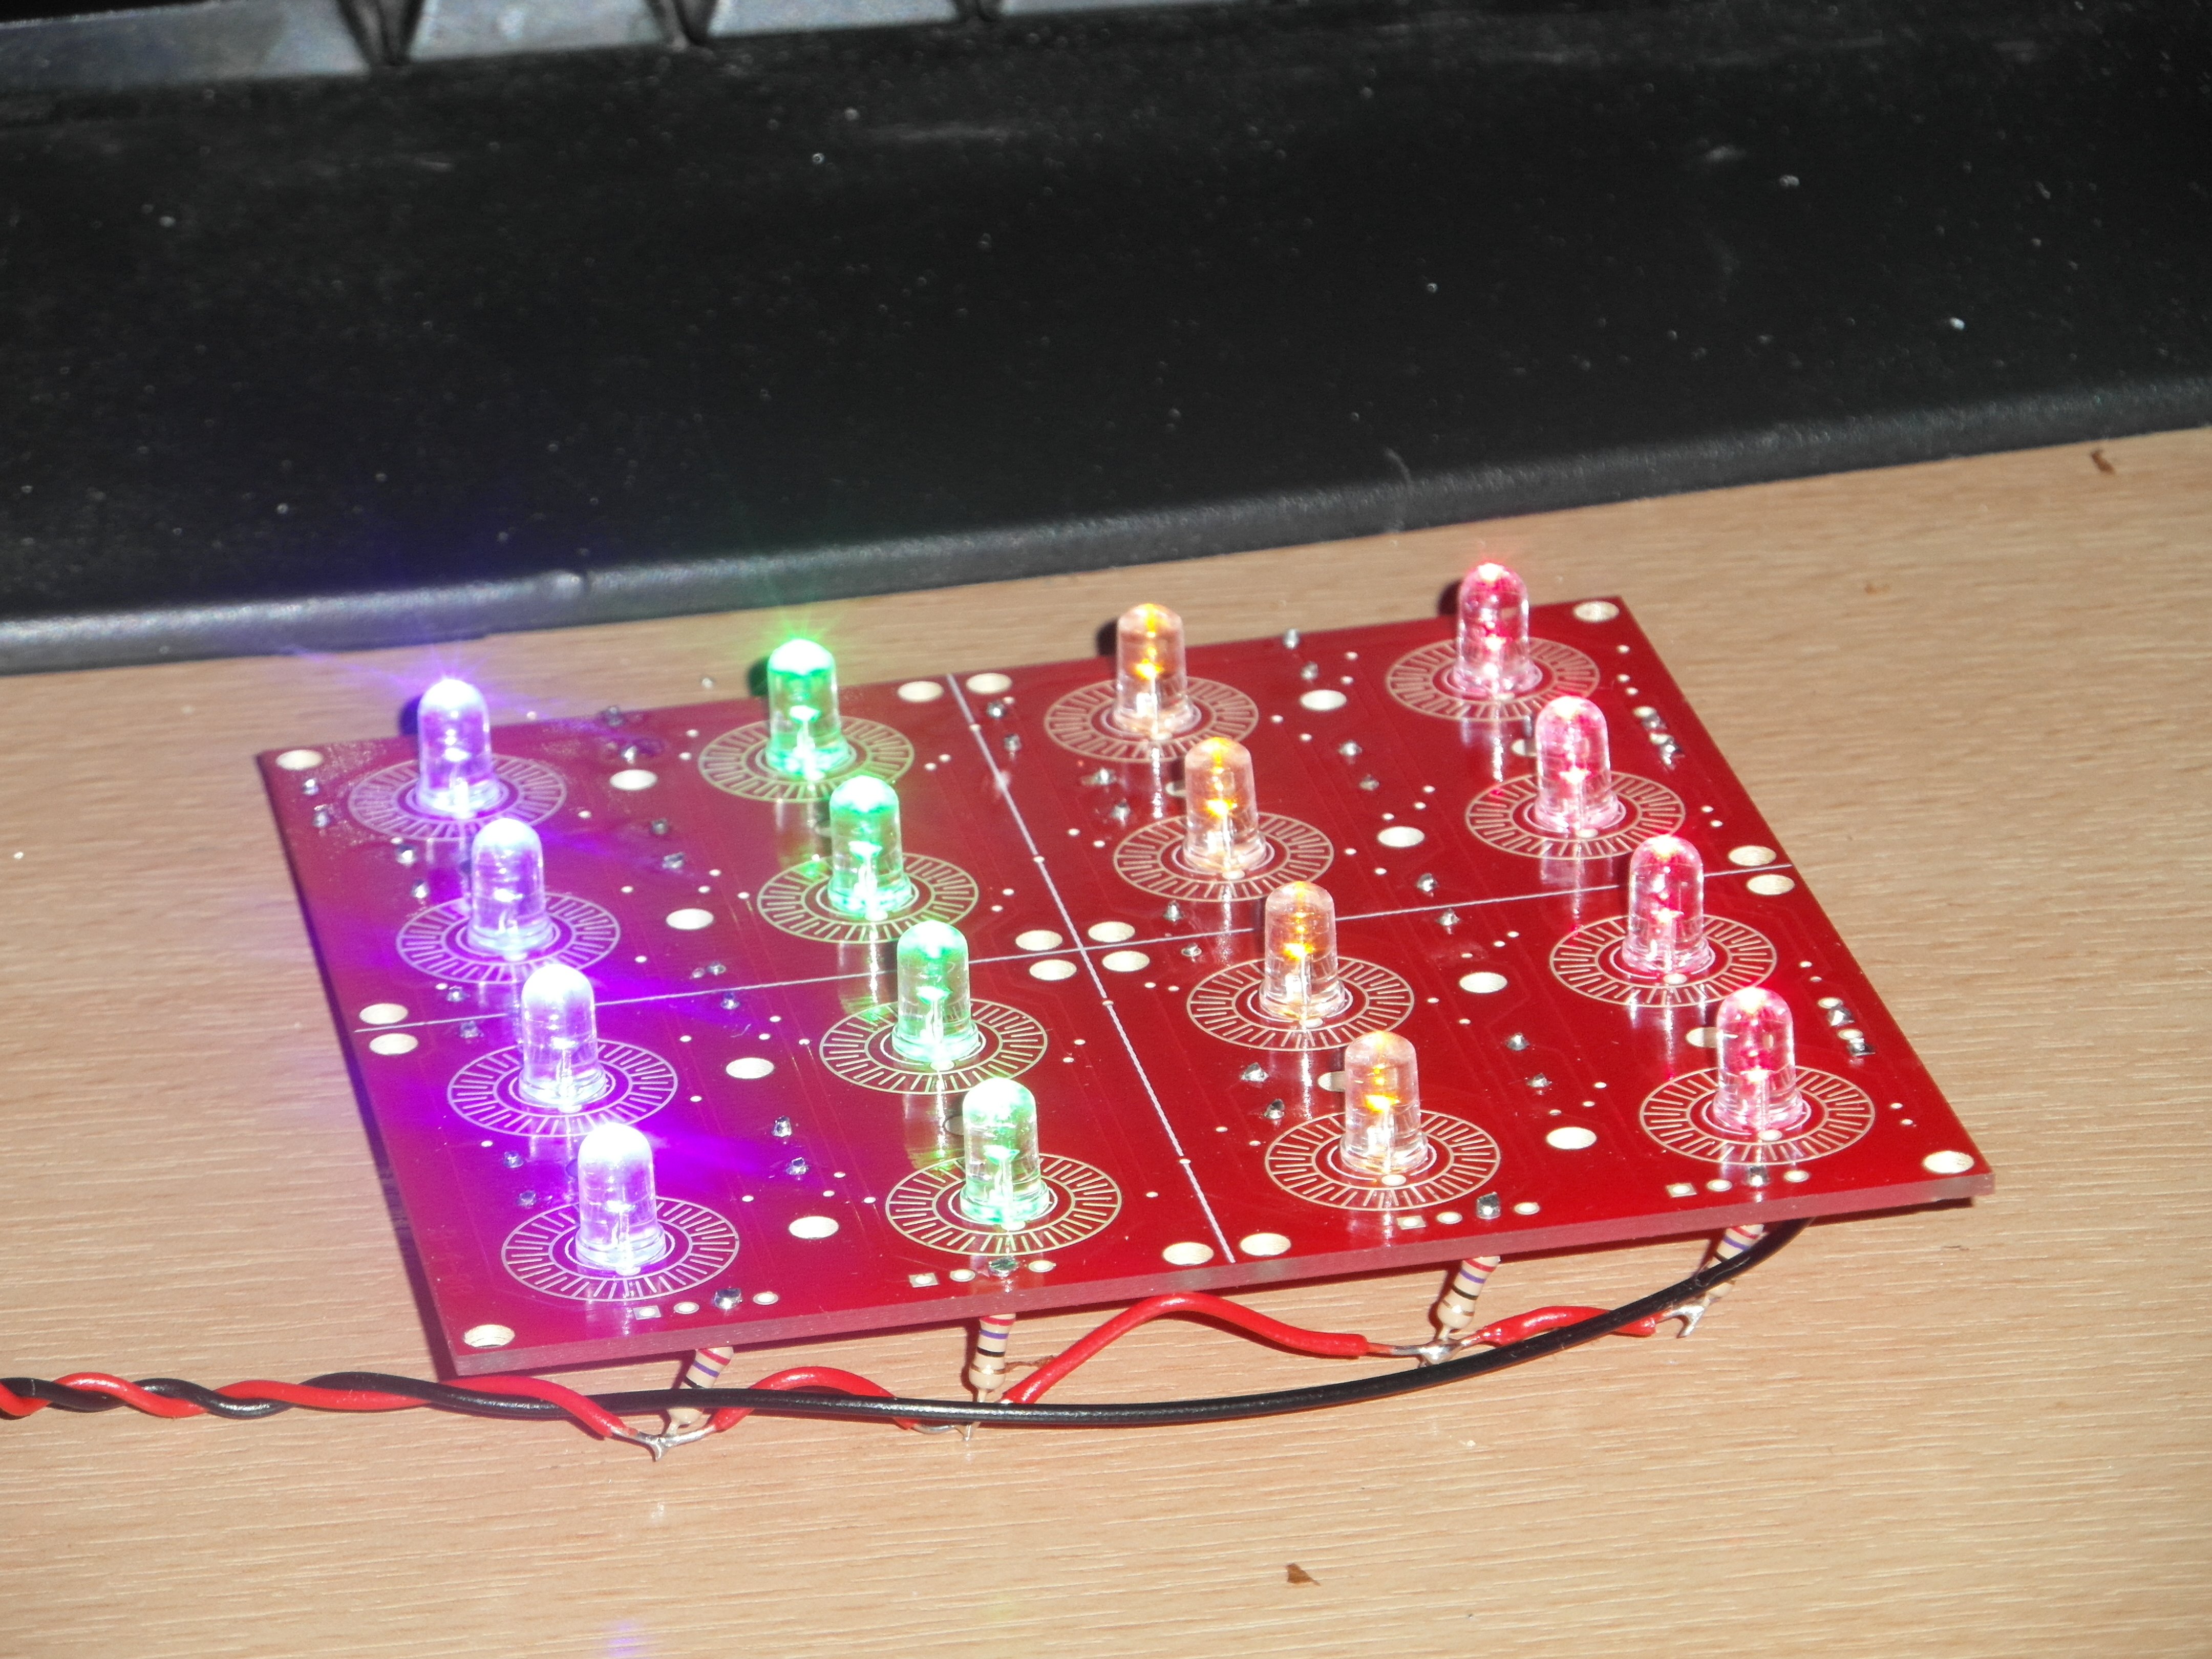 LEDs installed on button board